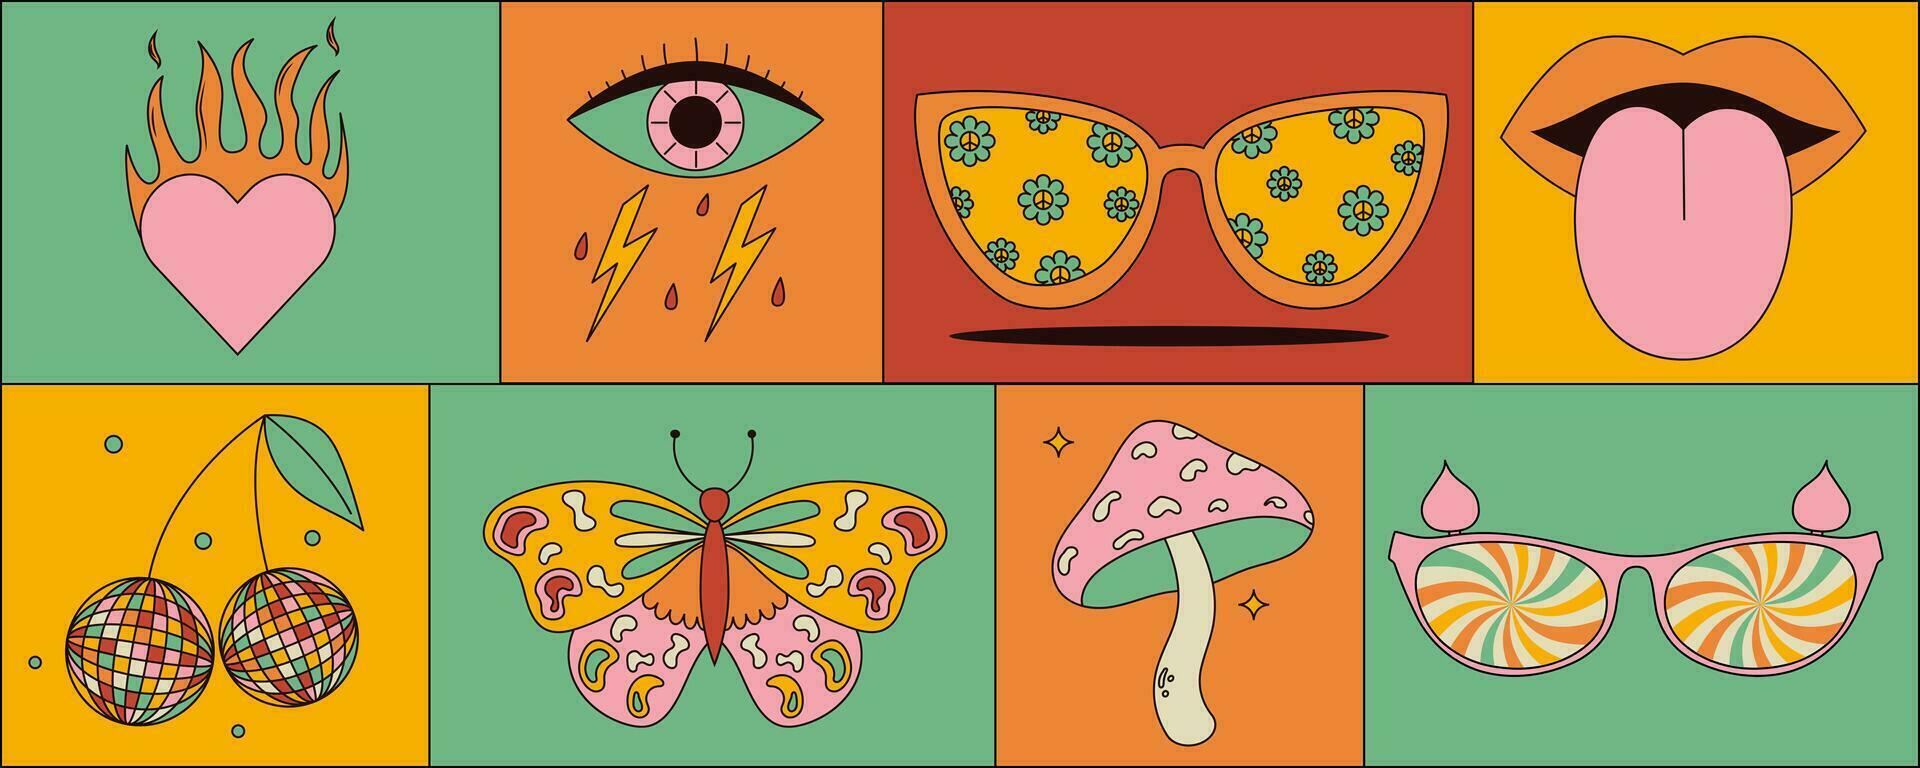 Set of retro groovy stickers with psychedelic mushrooms, cherry, flower, lips, eyes, sunglasses and more. 70s-inspired vector illustrations.